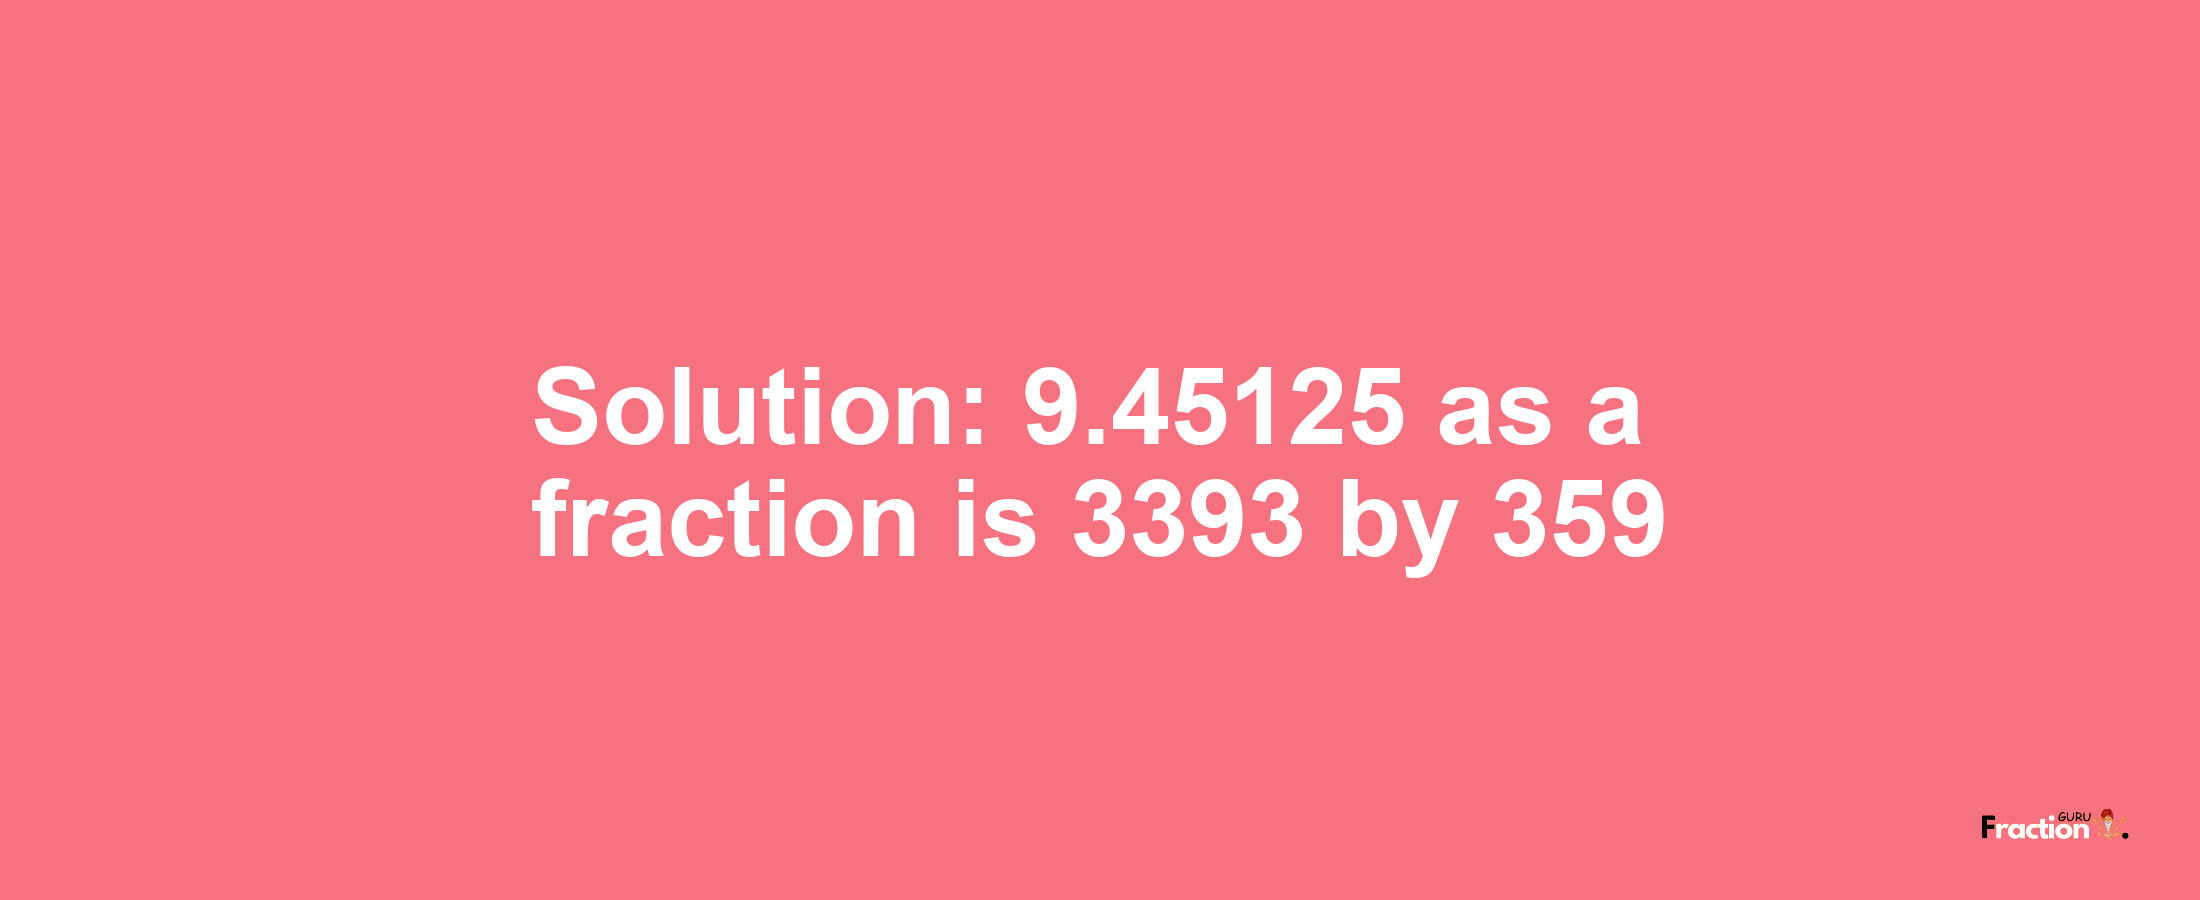 Solution:9.45125 as a fraction is 3393/359